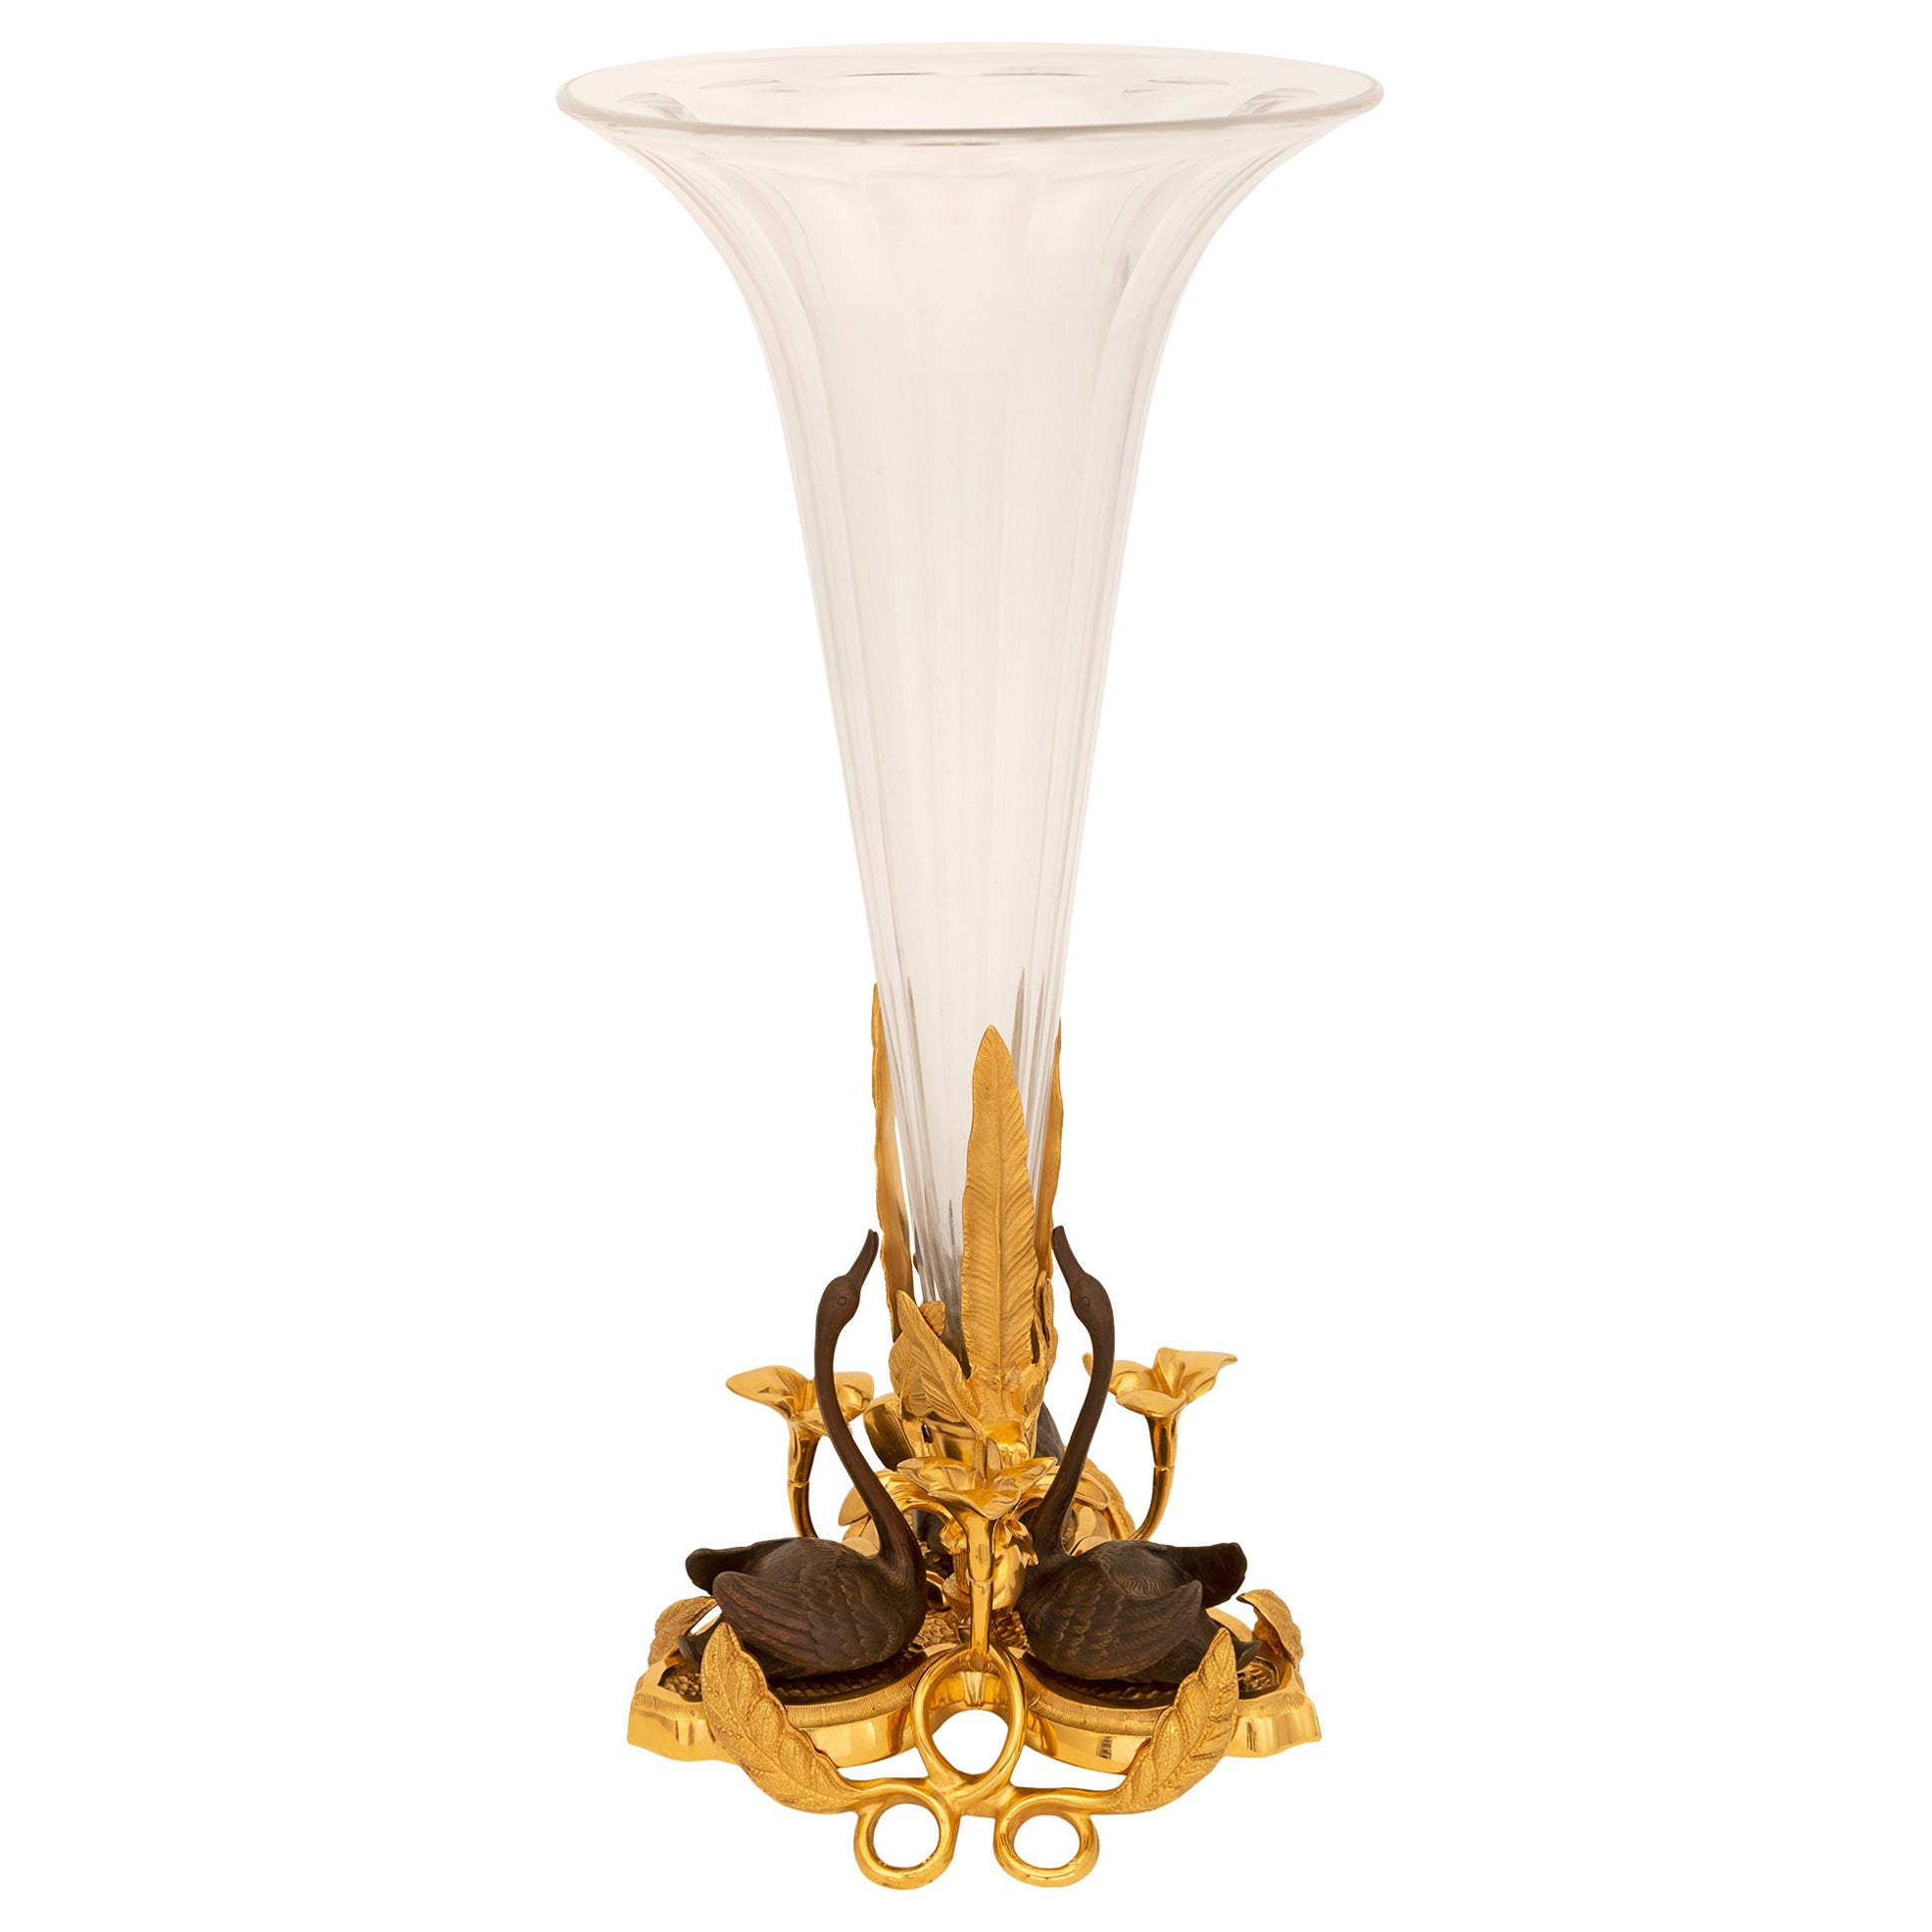 French 19th Century Belle Époque Period Bronze, Crystal, and Ormolu Vase